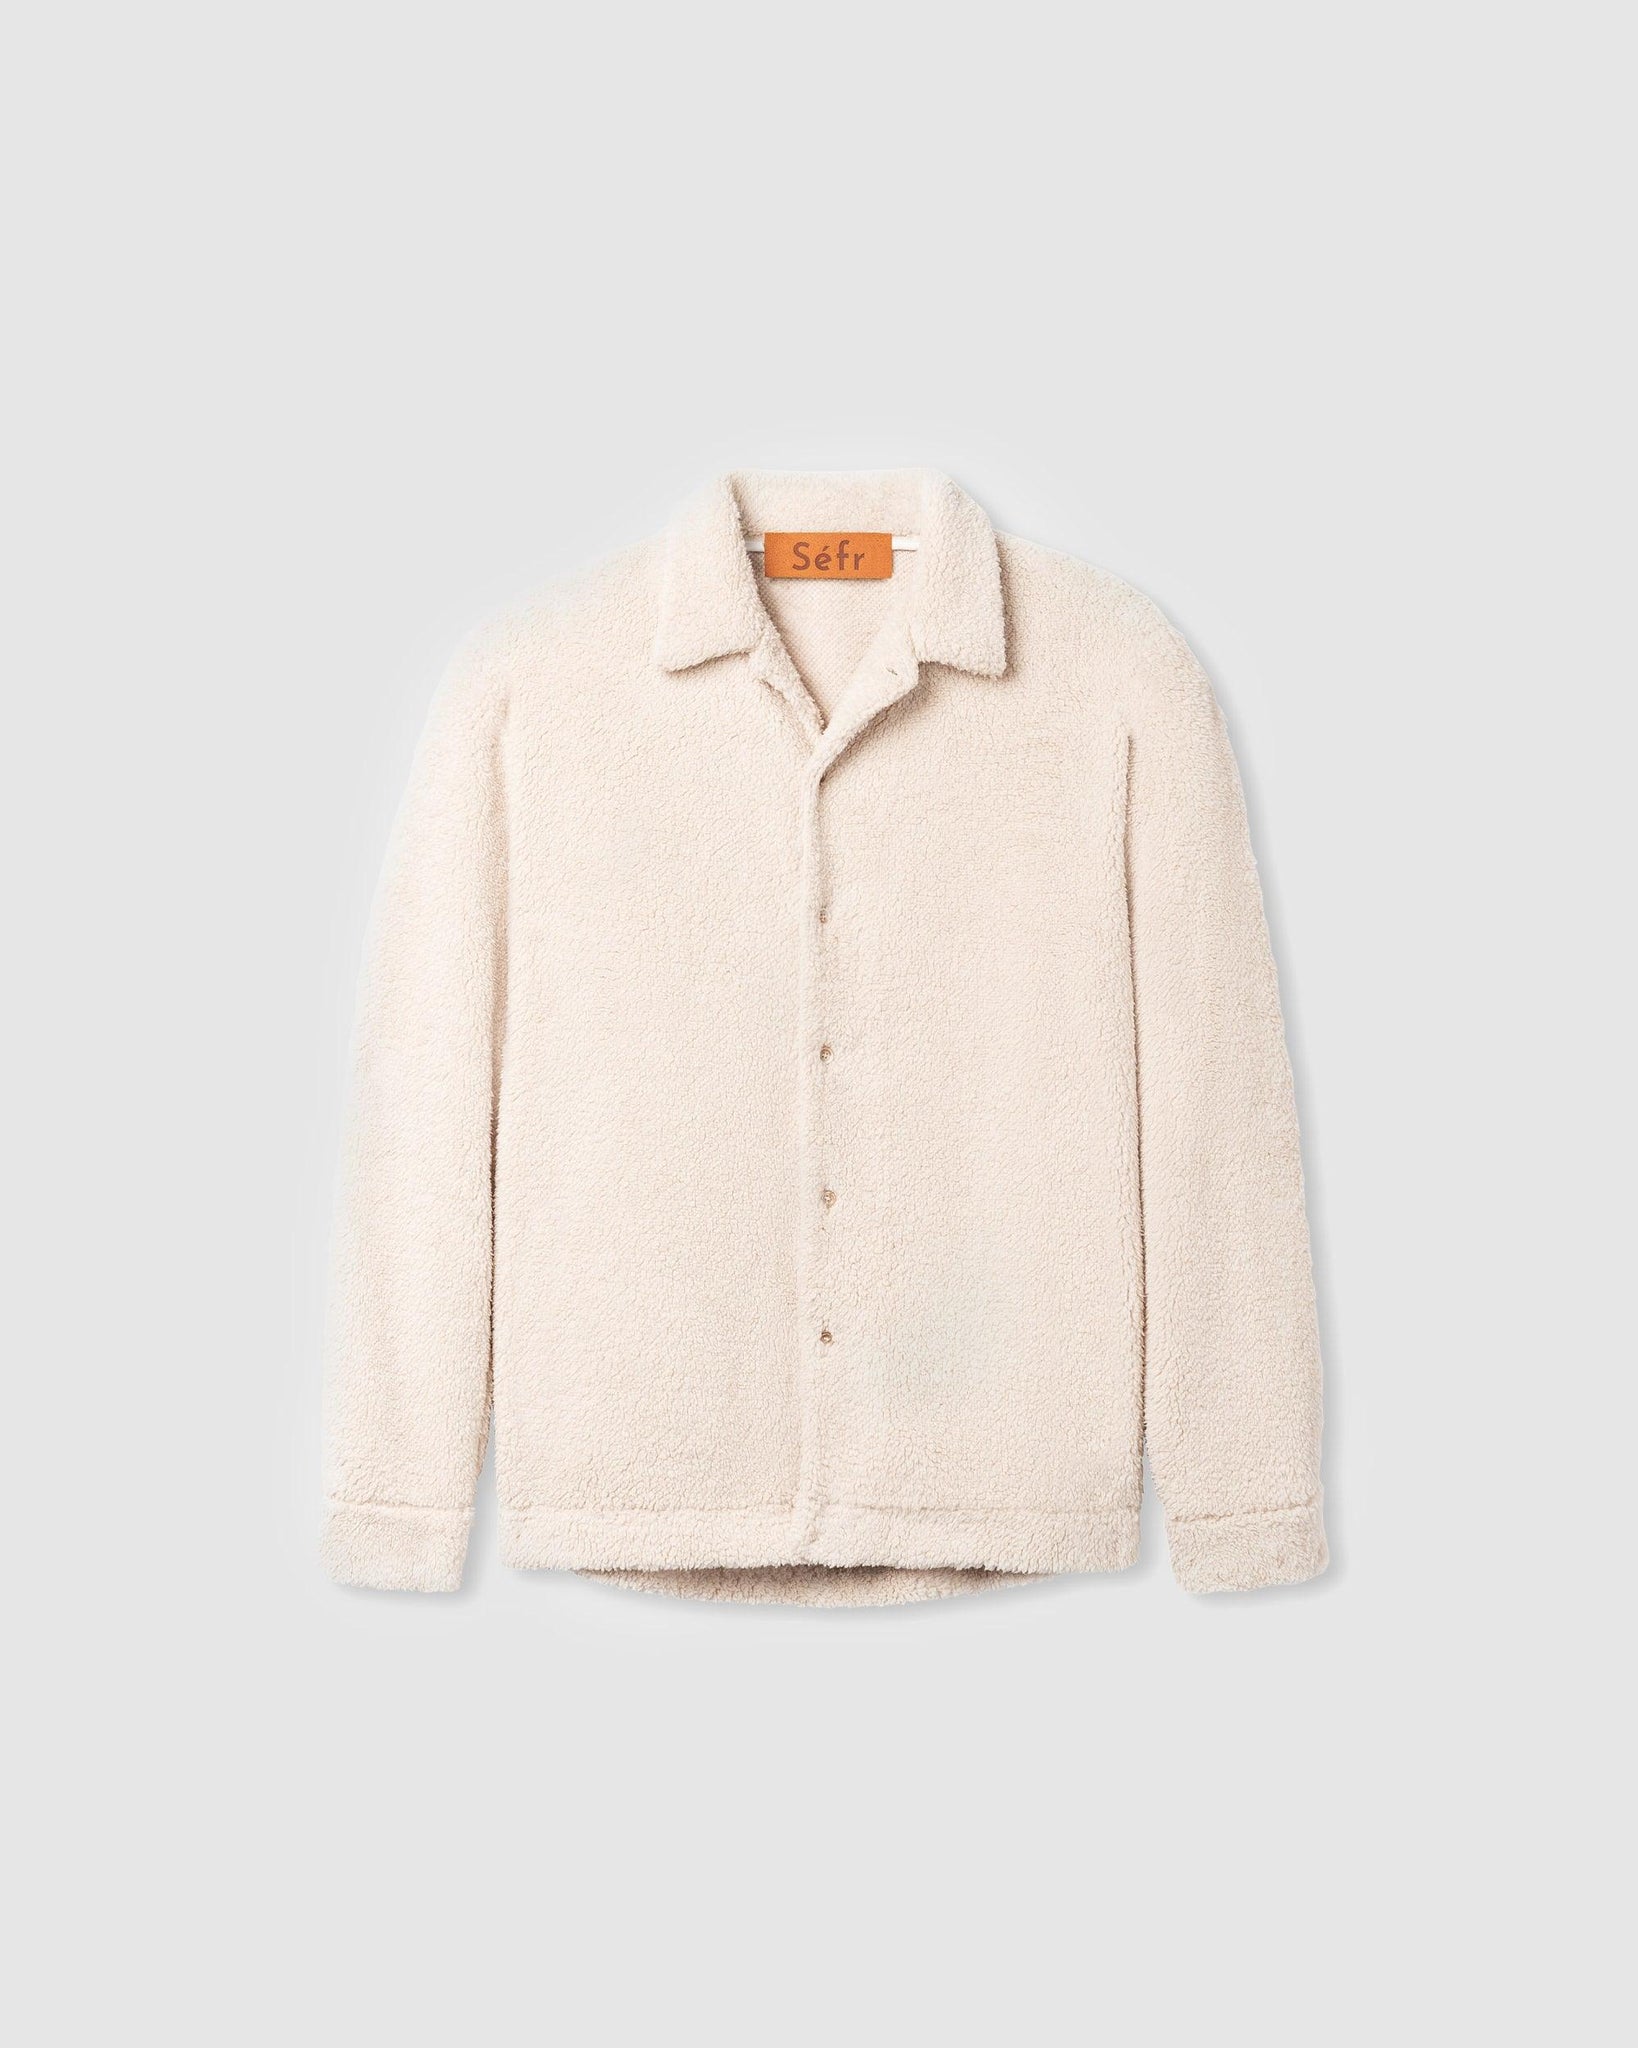 Sense Overshirt - {{ collection.title }} - Chinatown Country Club 